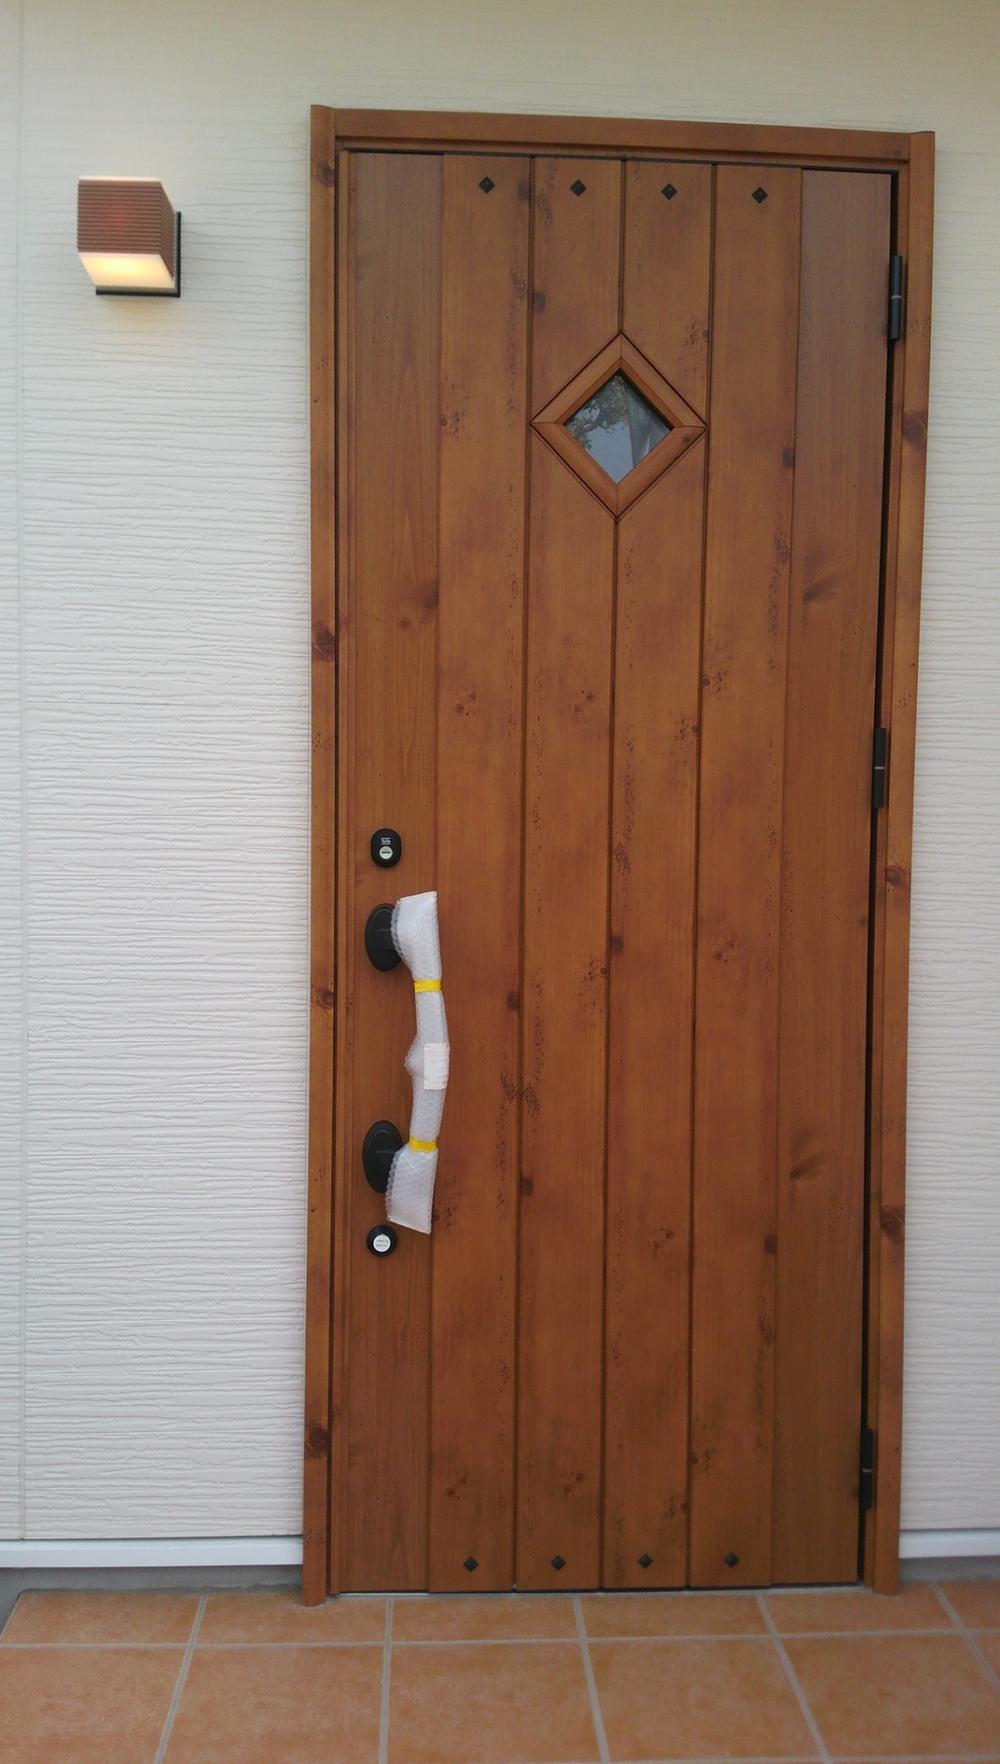 Same specifications photos (appearance). Even though aluminum sash there is also the entrance door of the wood grain.